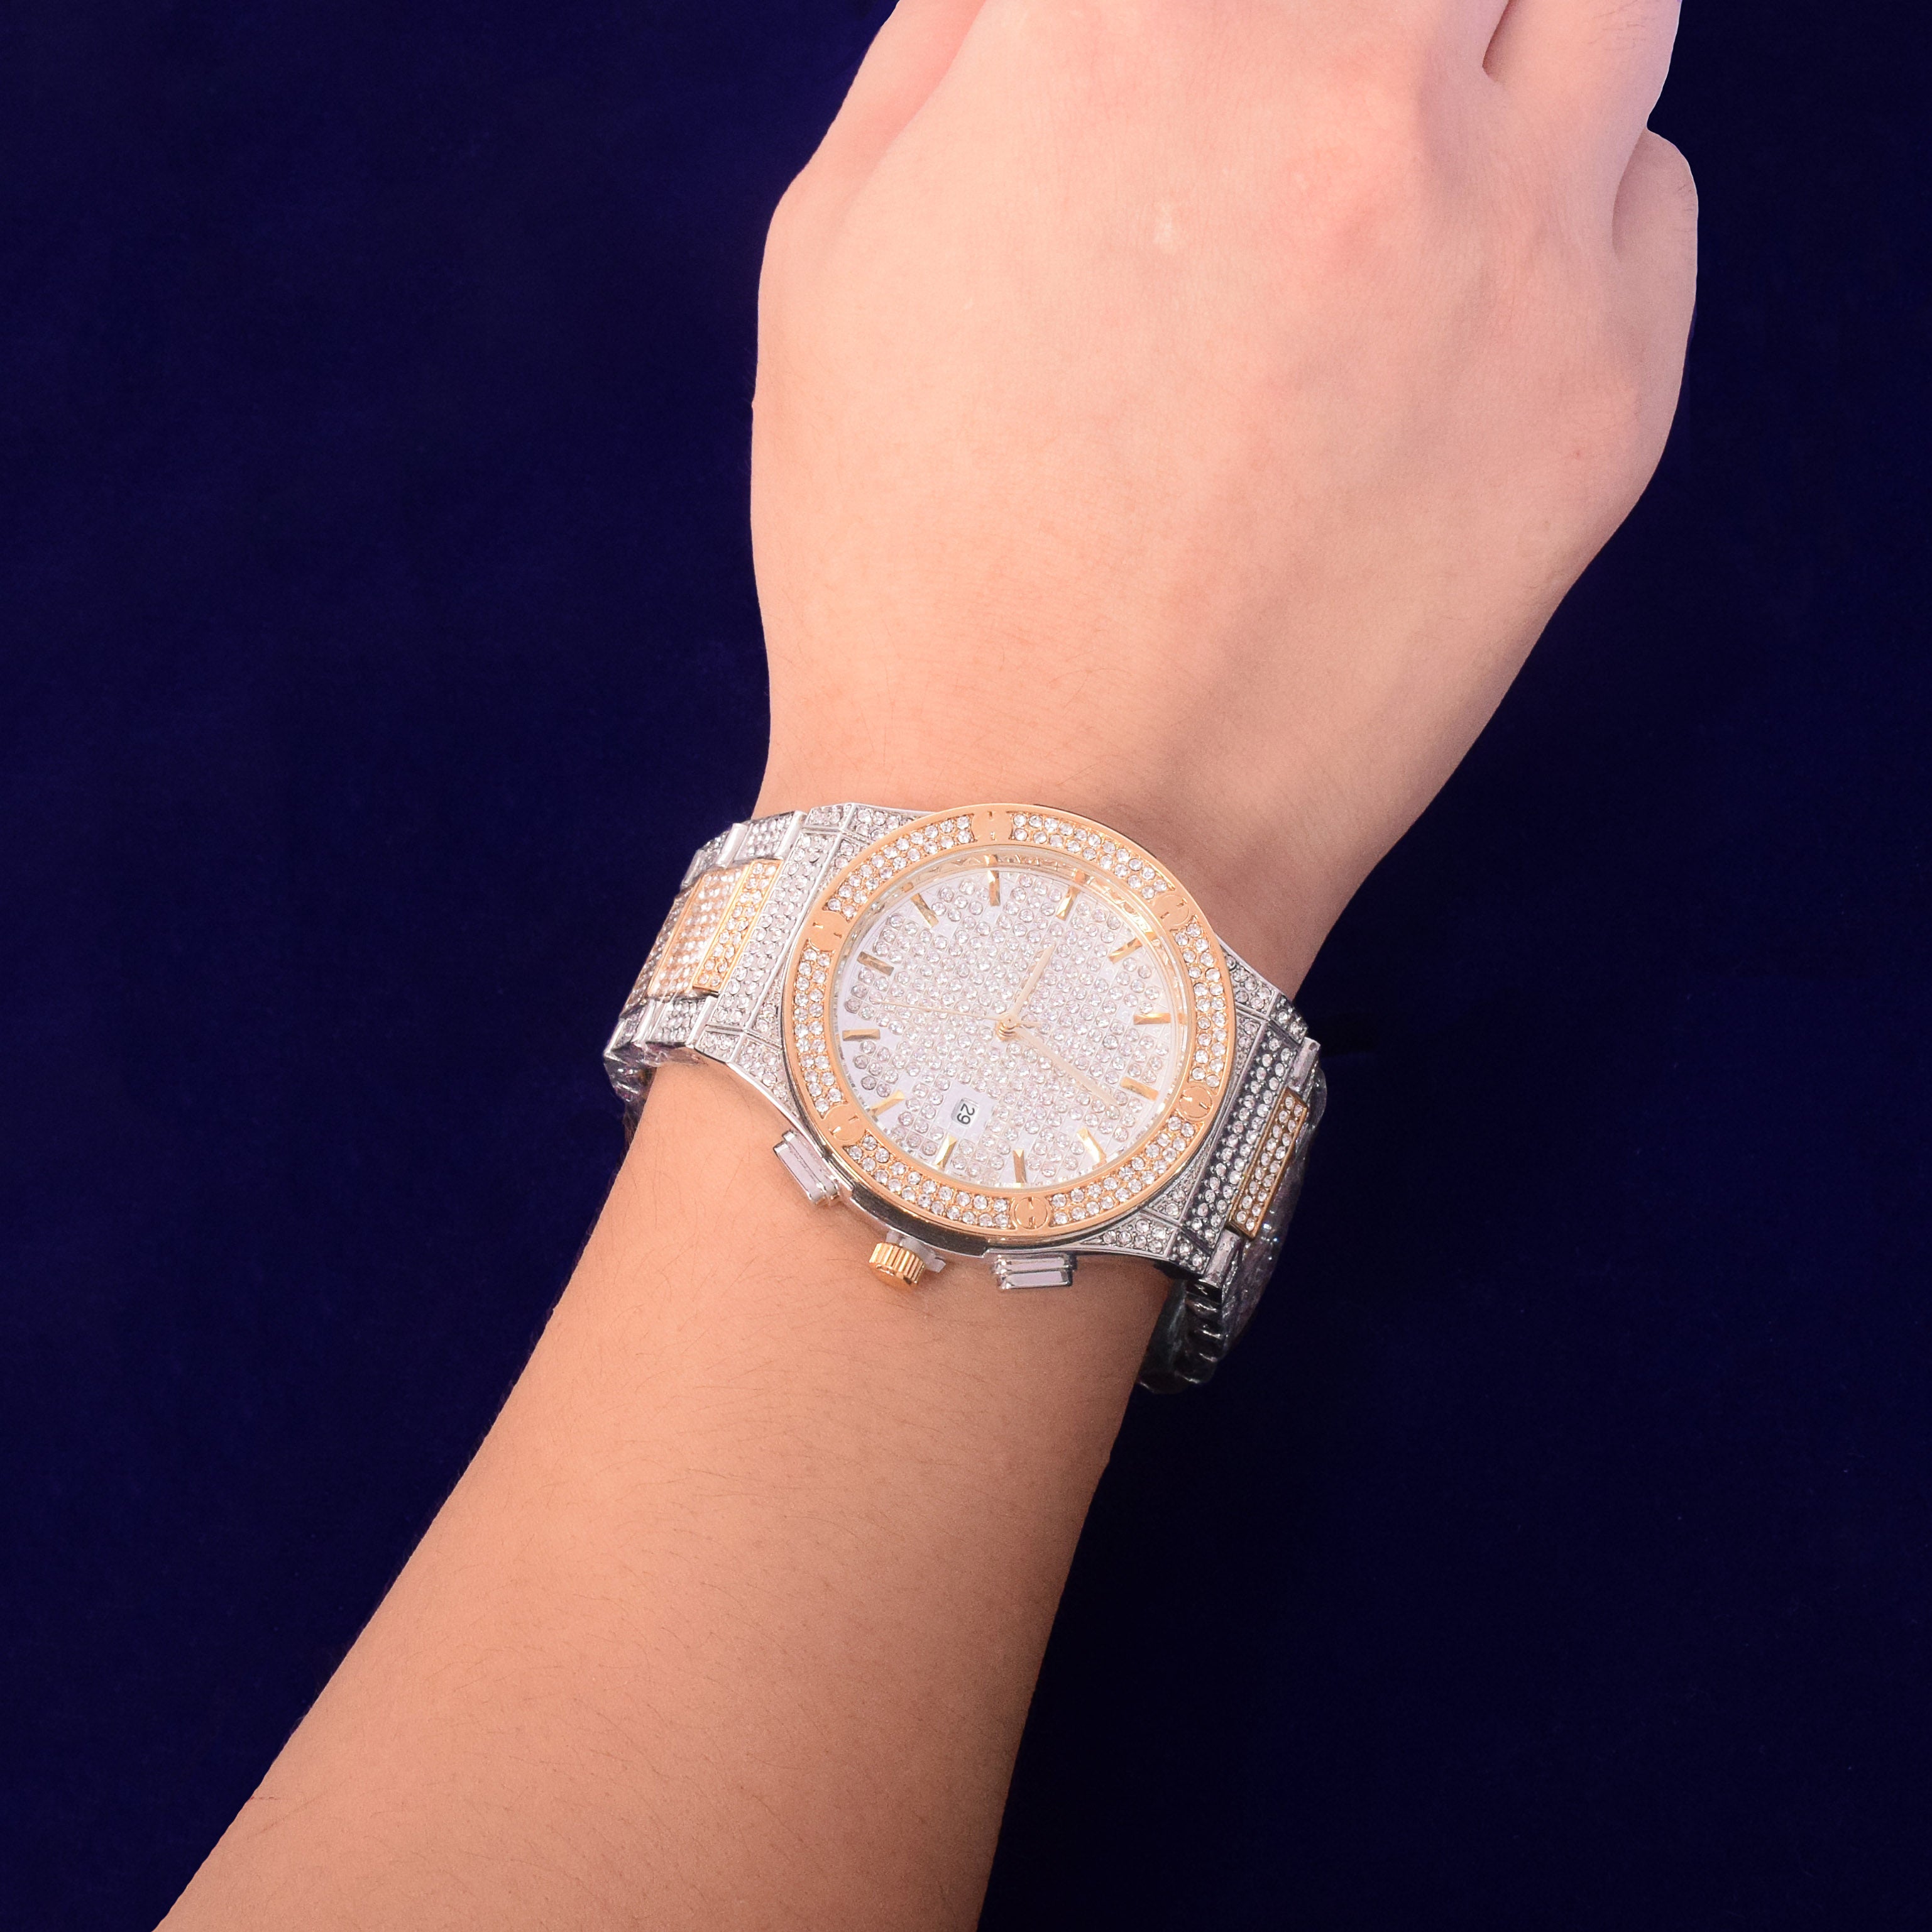 Silver and Gold Watch | Silver Watch with Diamonds | Gold Watch with Diamonds